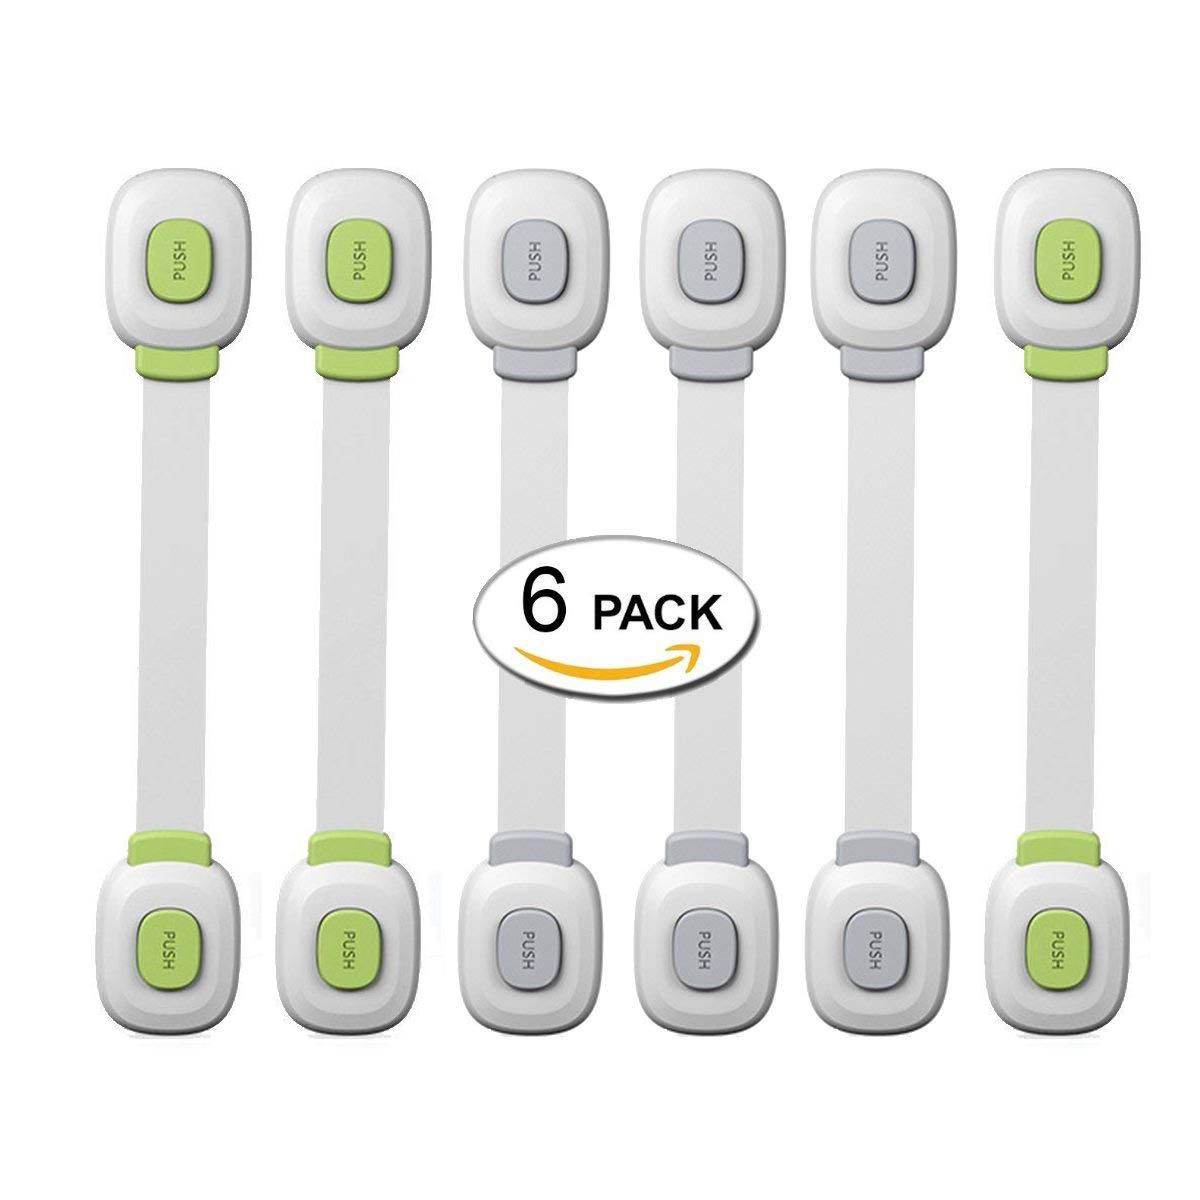 White Appliances 6-Pack Baby Safety Locks Fridge and Oven Toilet Seat Tools Not Required Drawers 3M Adhesive with Adjustable Strap and Latch System Child Proof Cabinets 